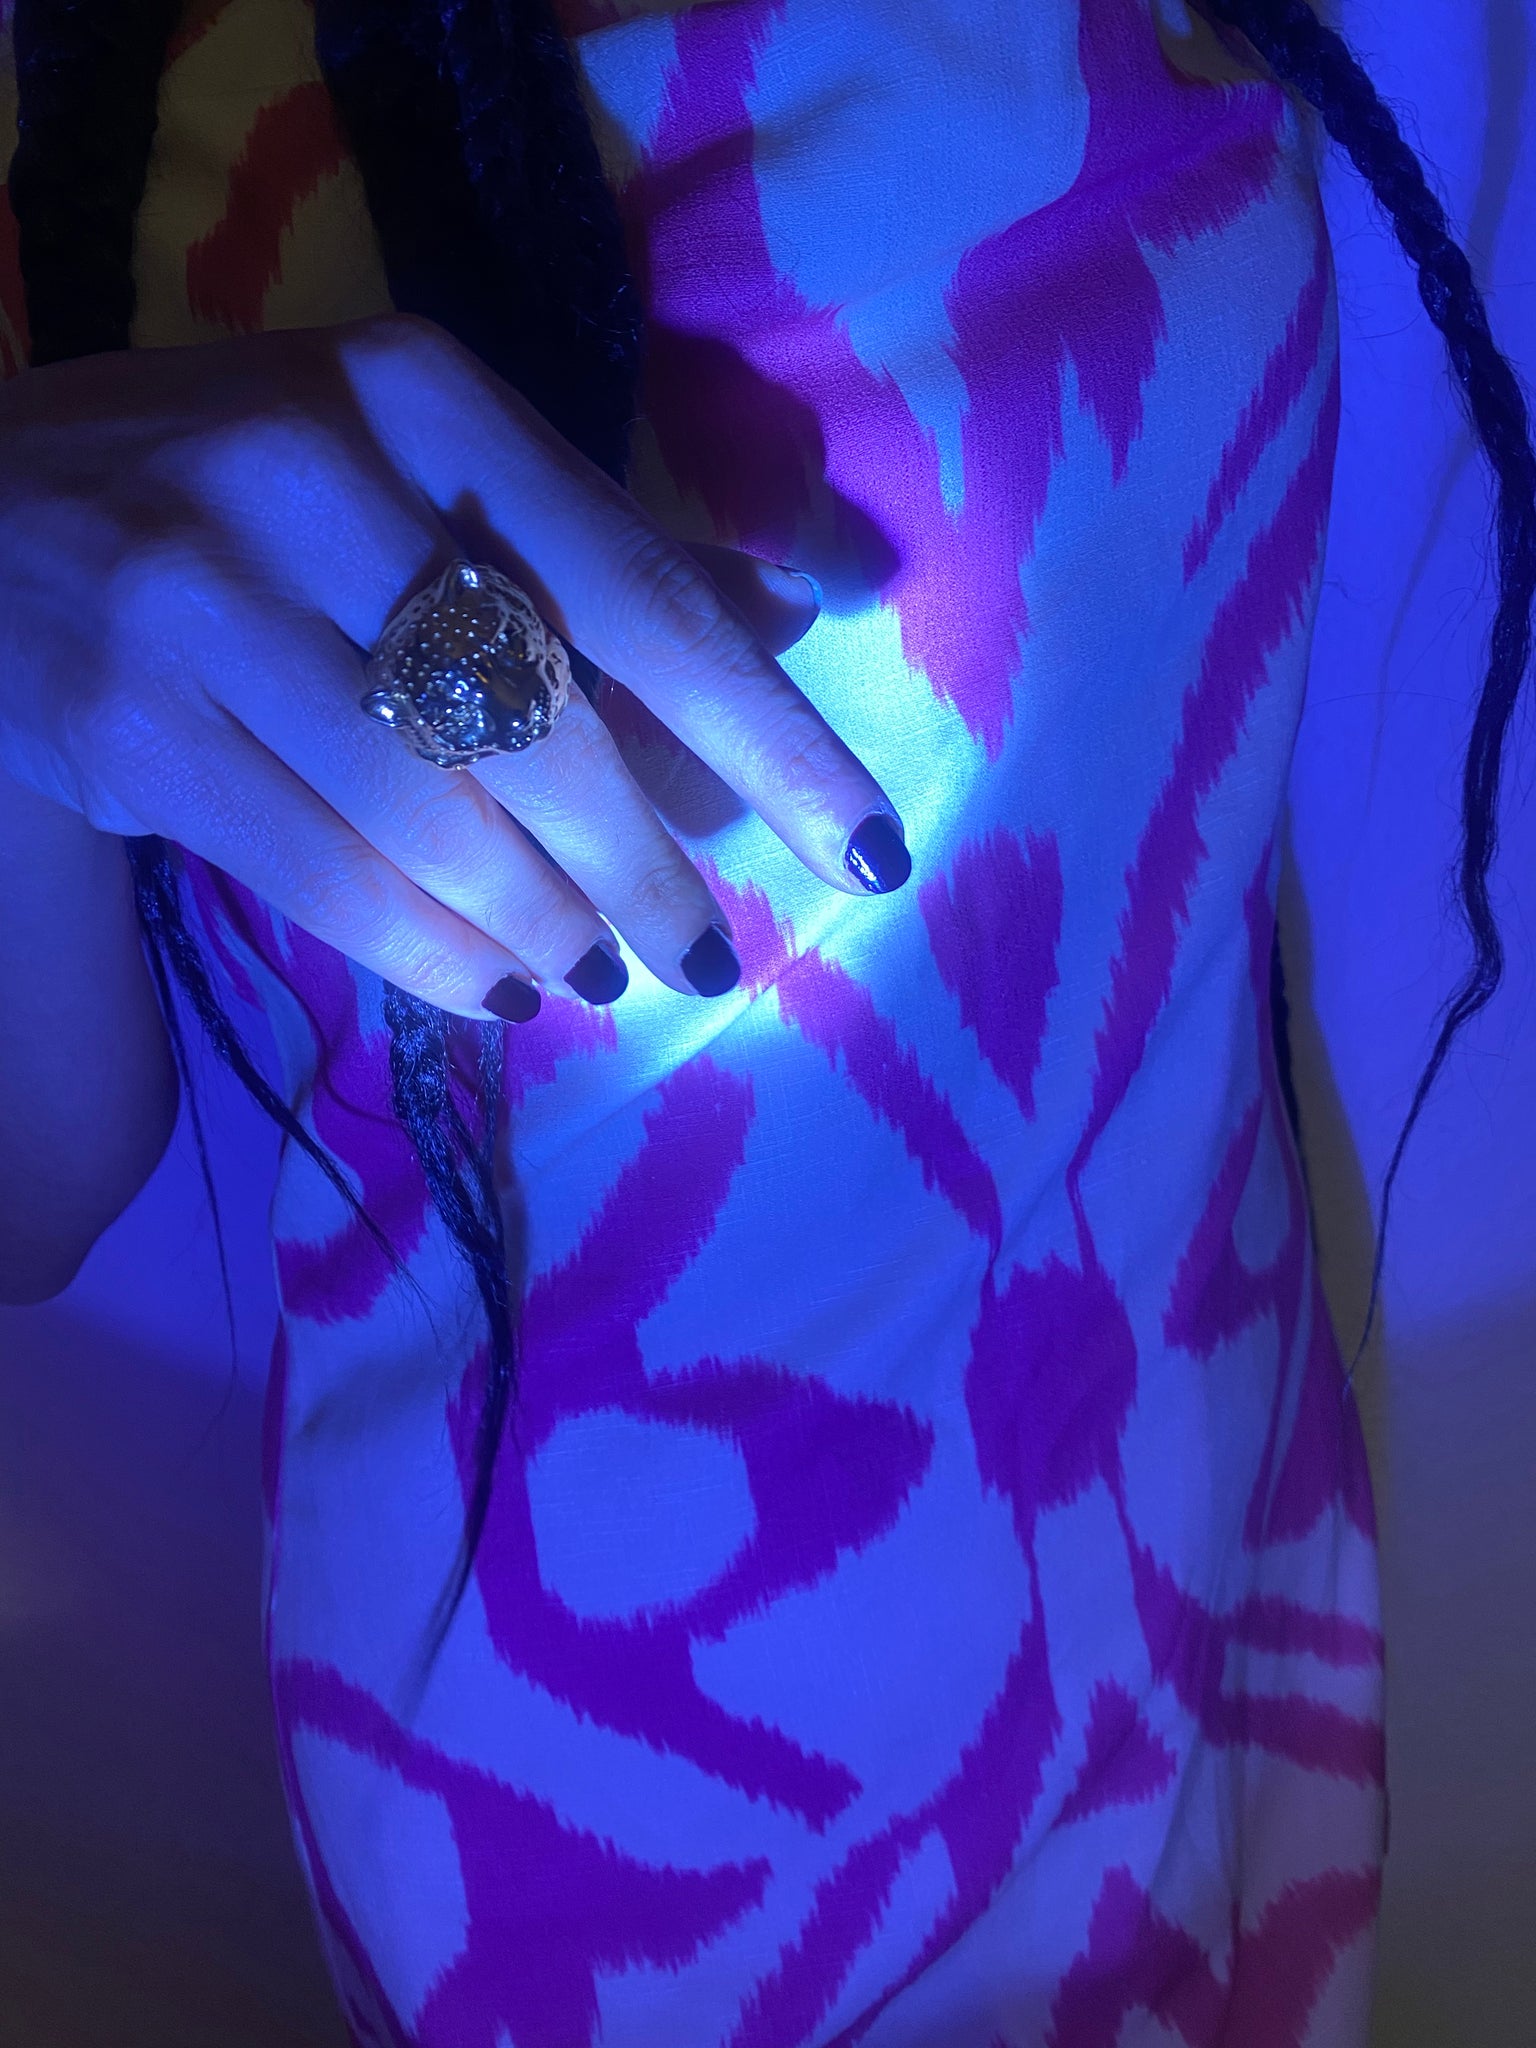 With moody blue lighting, a woman holds up her hand wearing a gold snow leopard ring and wearing an adras dress.